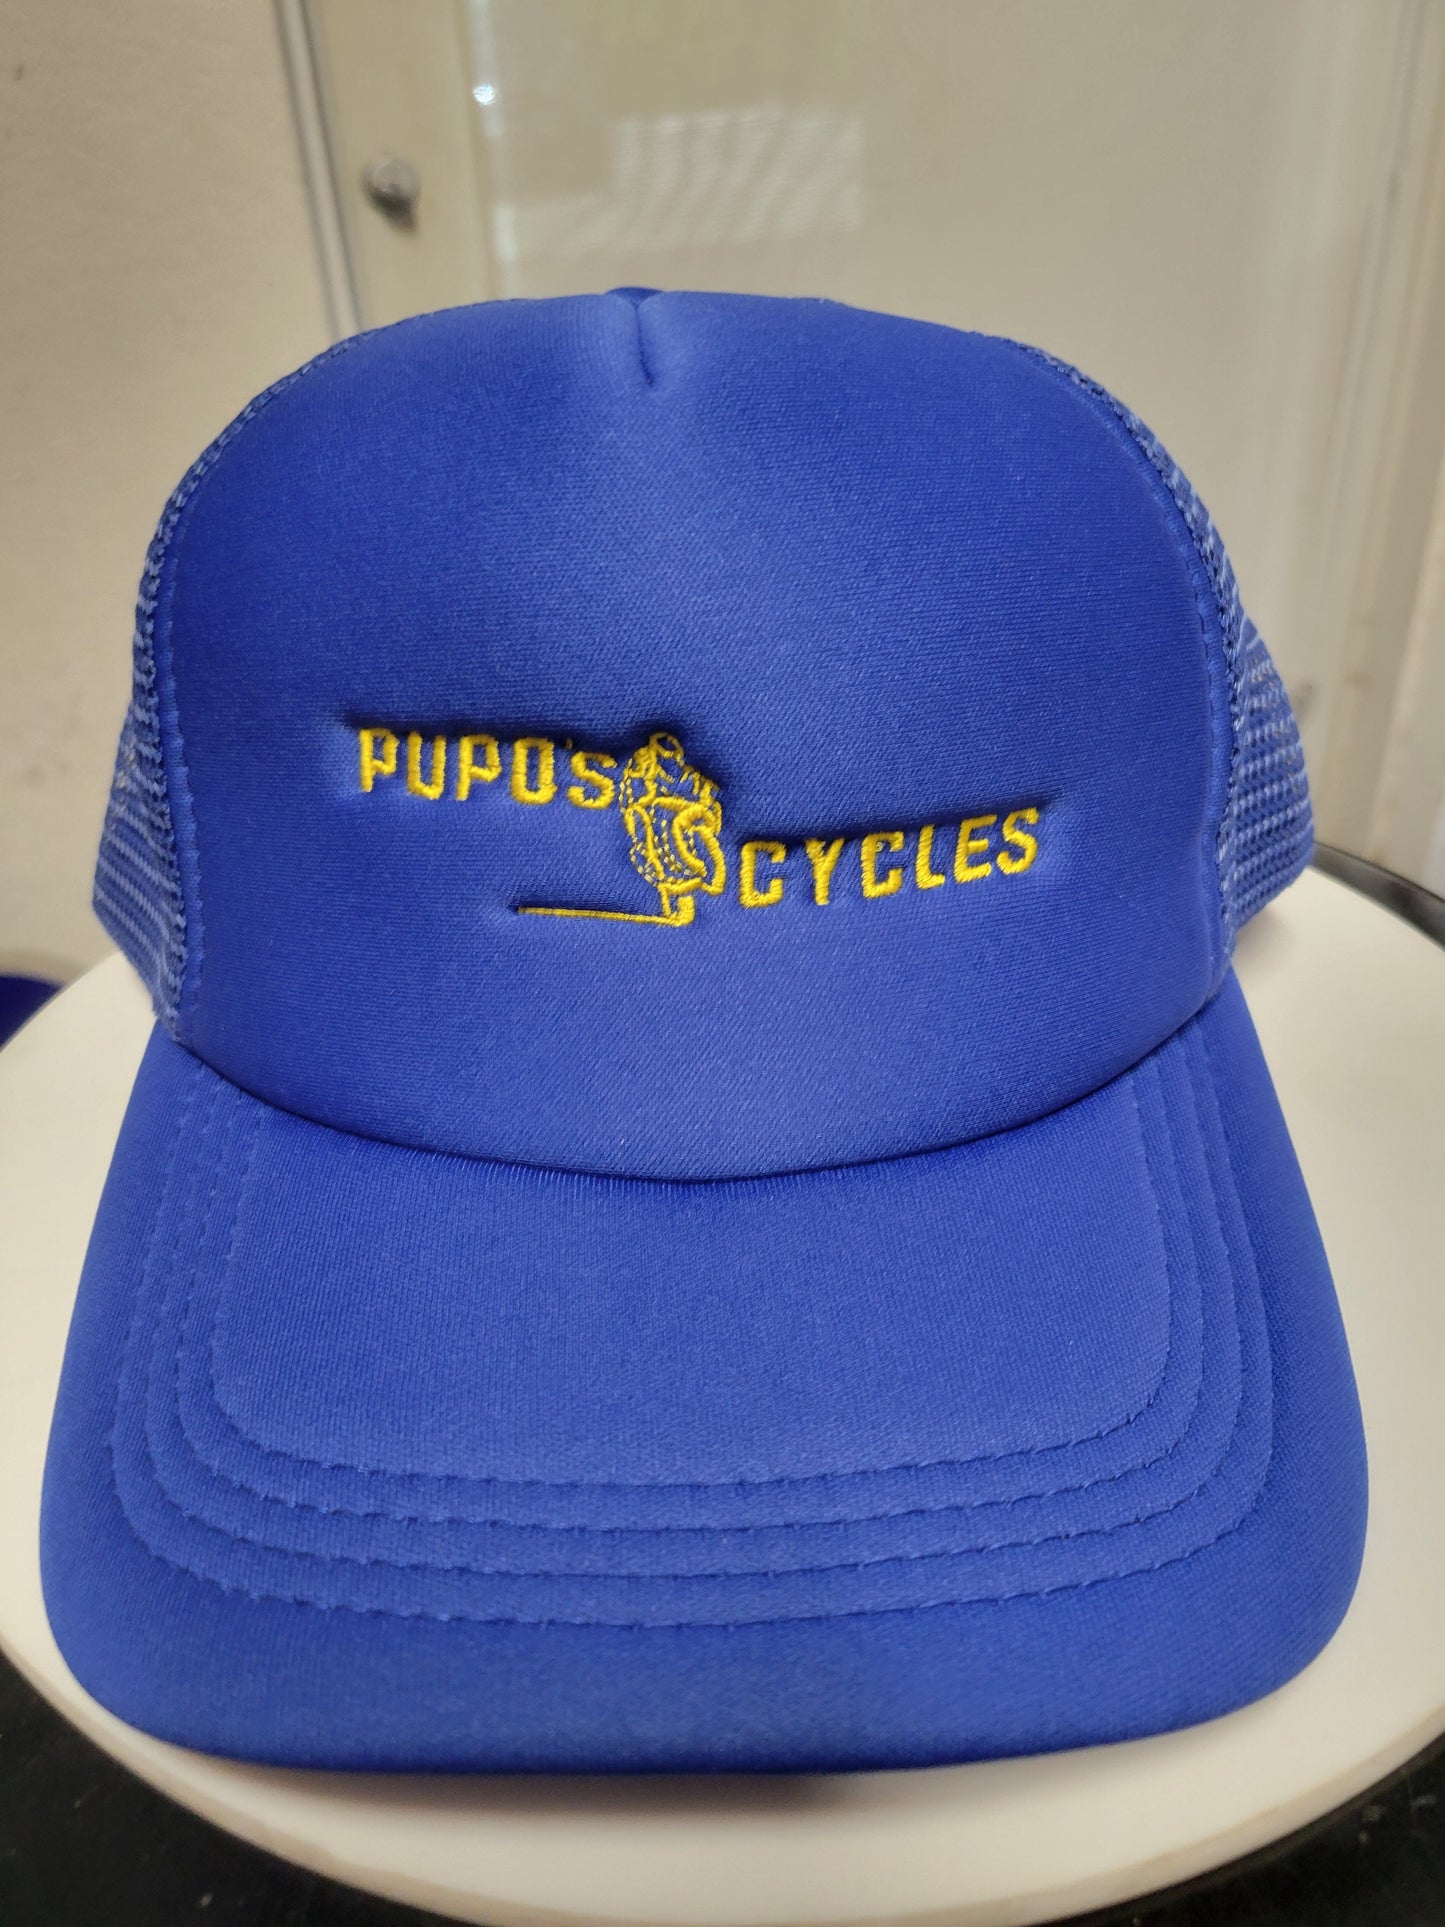 Pupo's Cycles Unisex Fashion All-Match Street Sports Lightweight Breathable Baseball Cap,